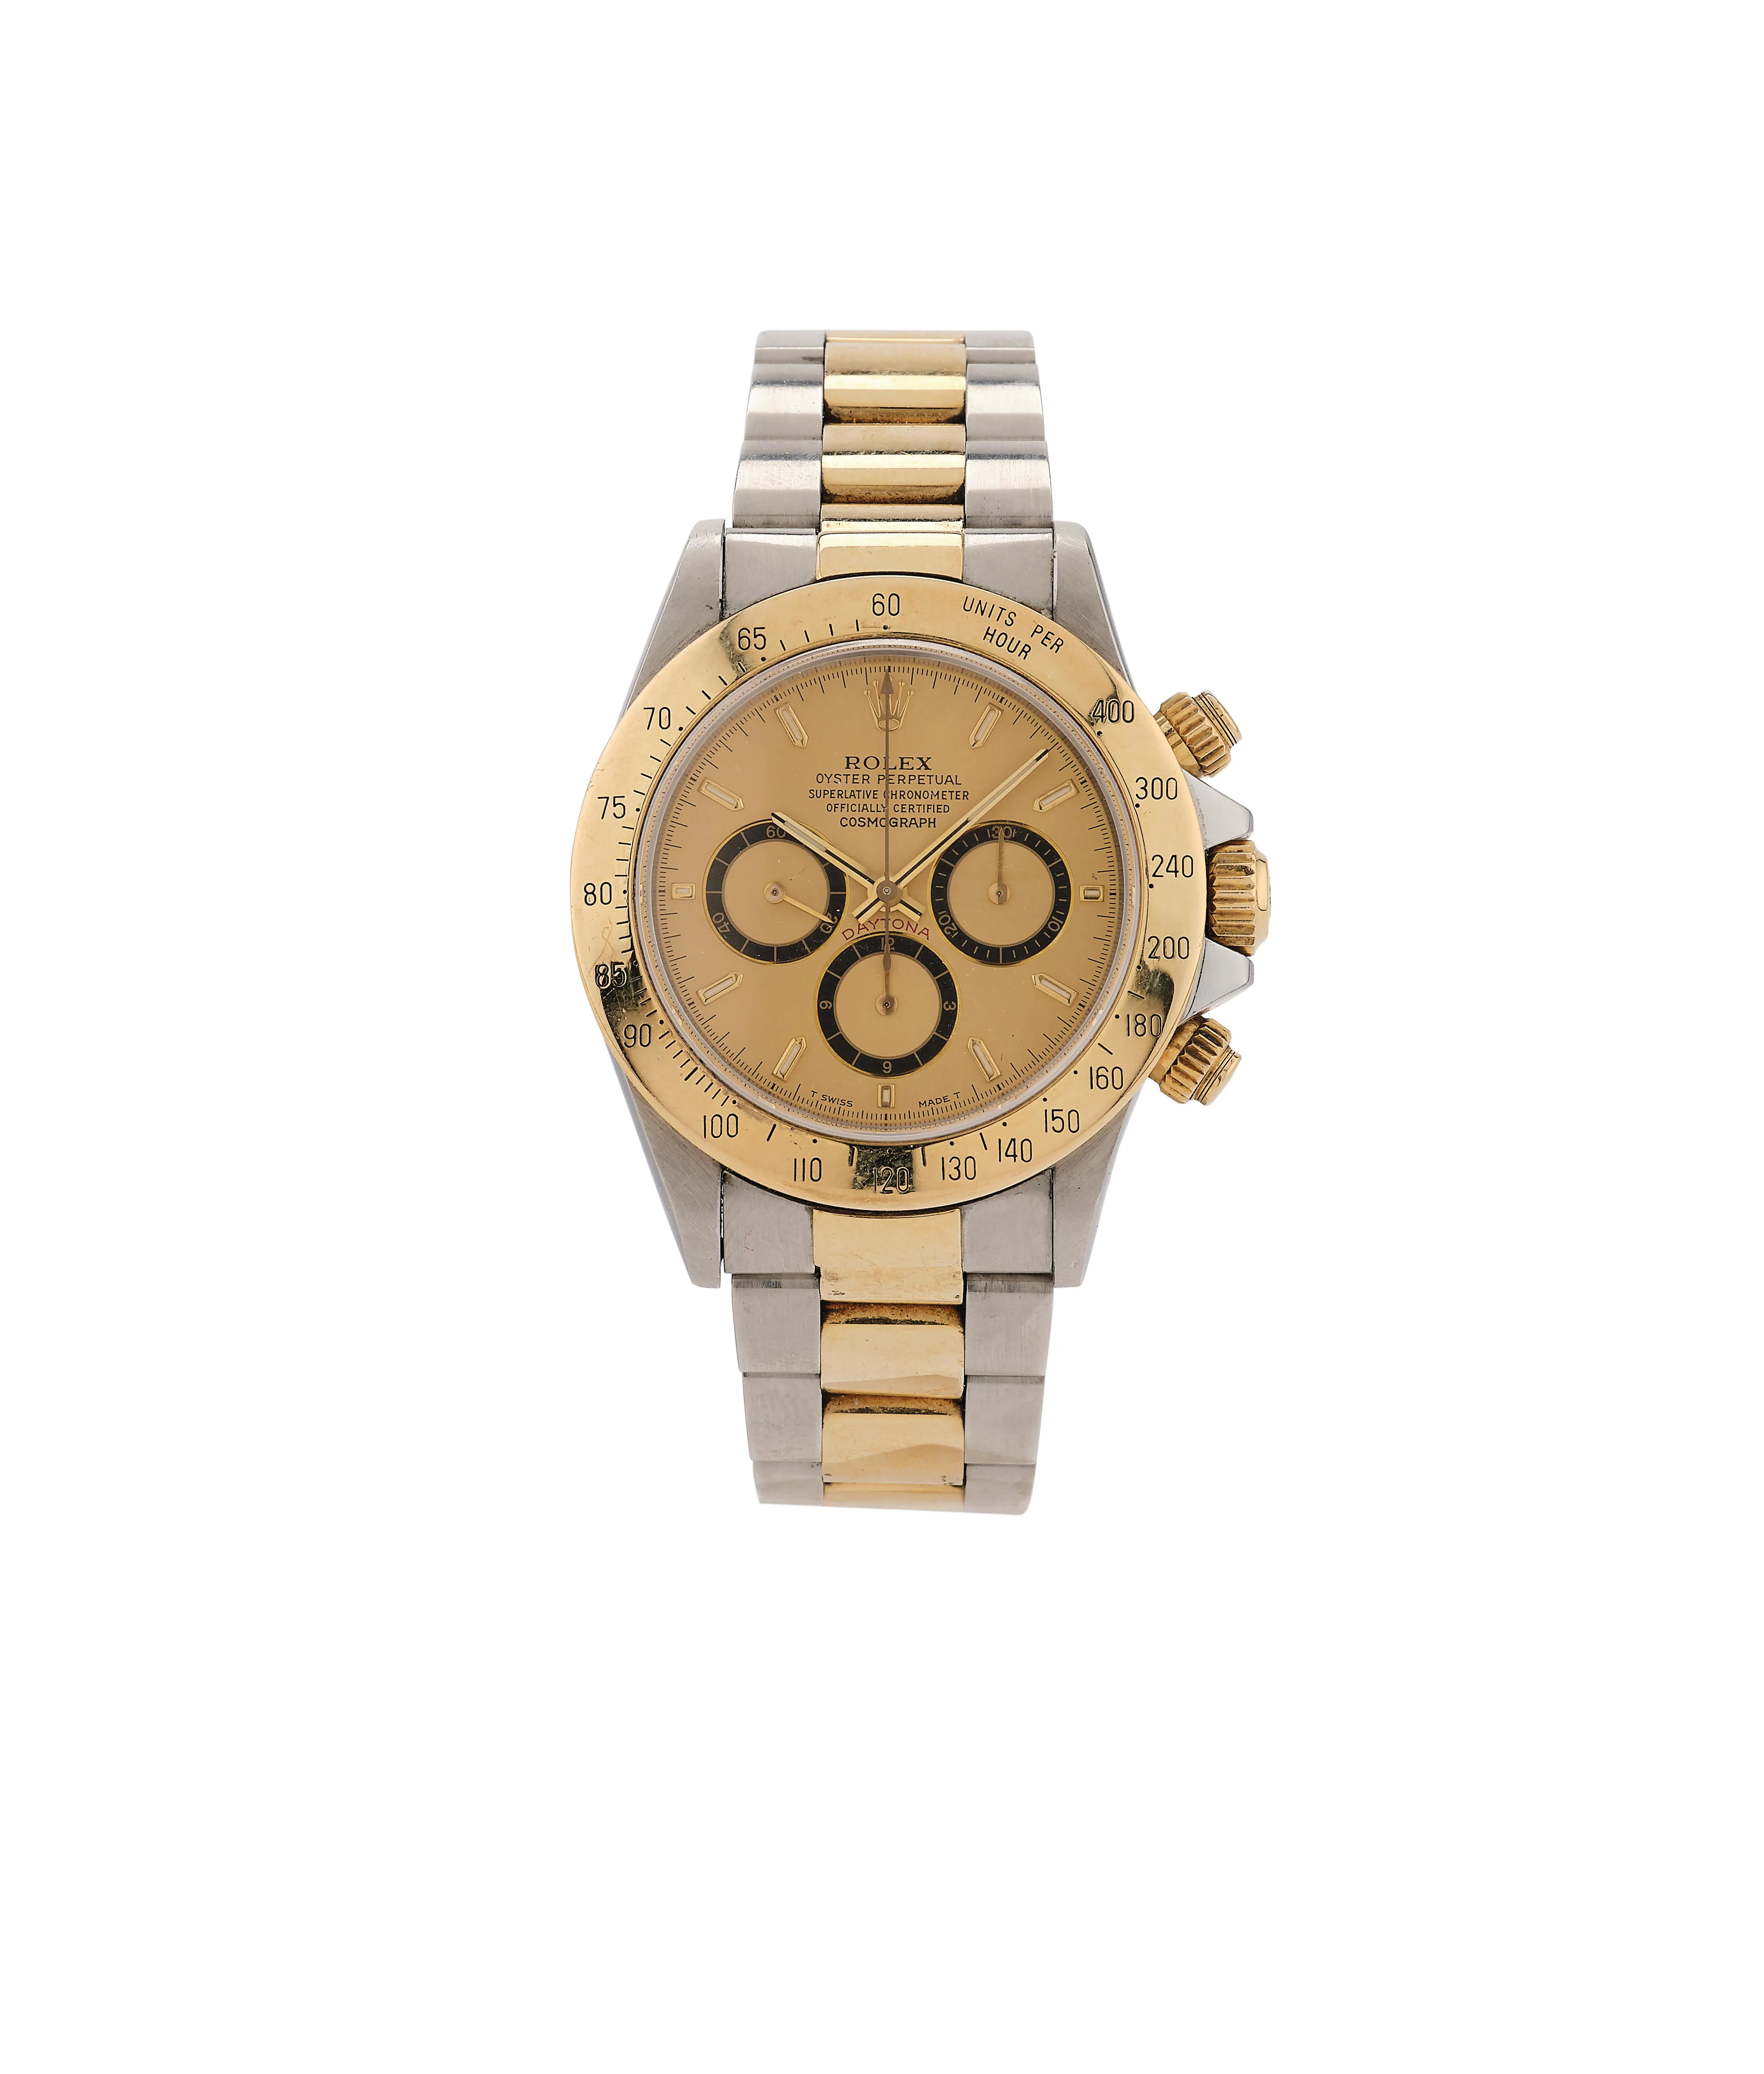 Rolex Daytona 16523 40mm Stainless steel and gold Gold-coloured